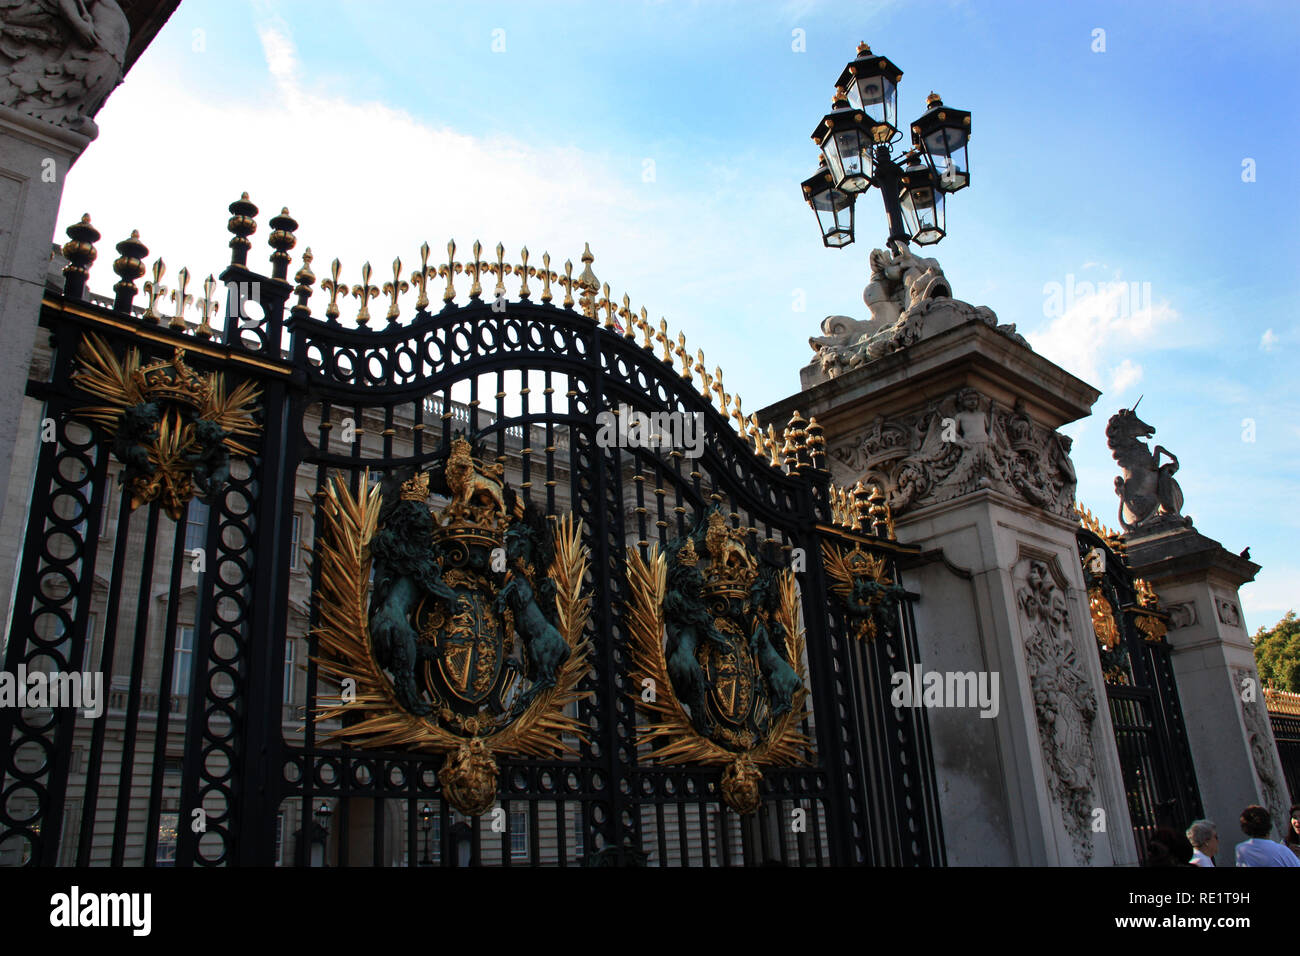 Ornate main gate with the royal coat of arms at Buckingham Palace in London, United Kingdom Stock Photo